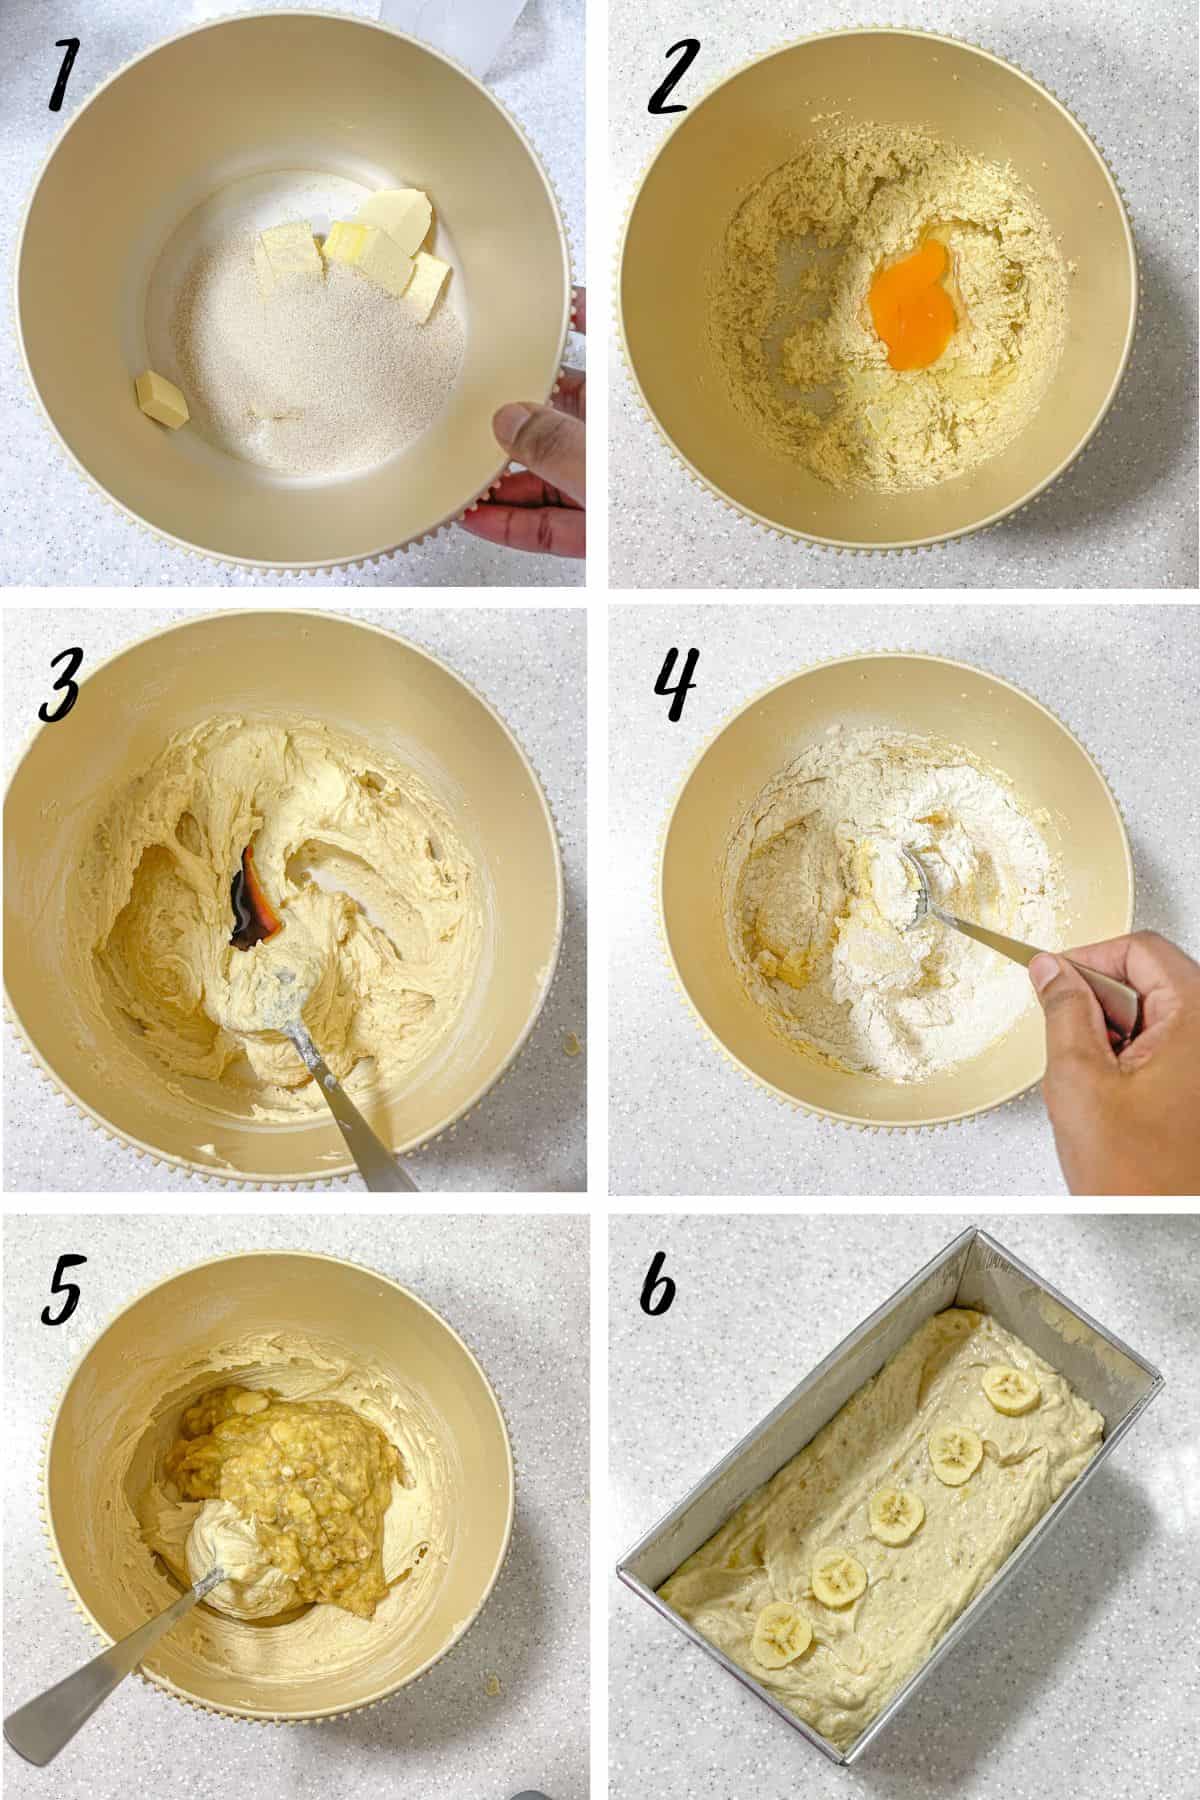 A poster of 6 images showing how to mix banana butter cake batter.